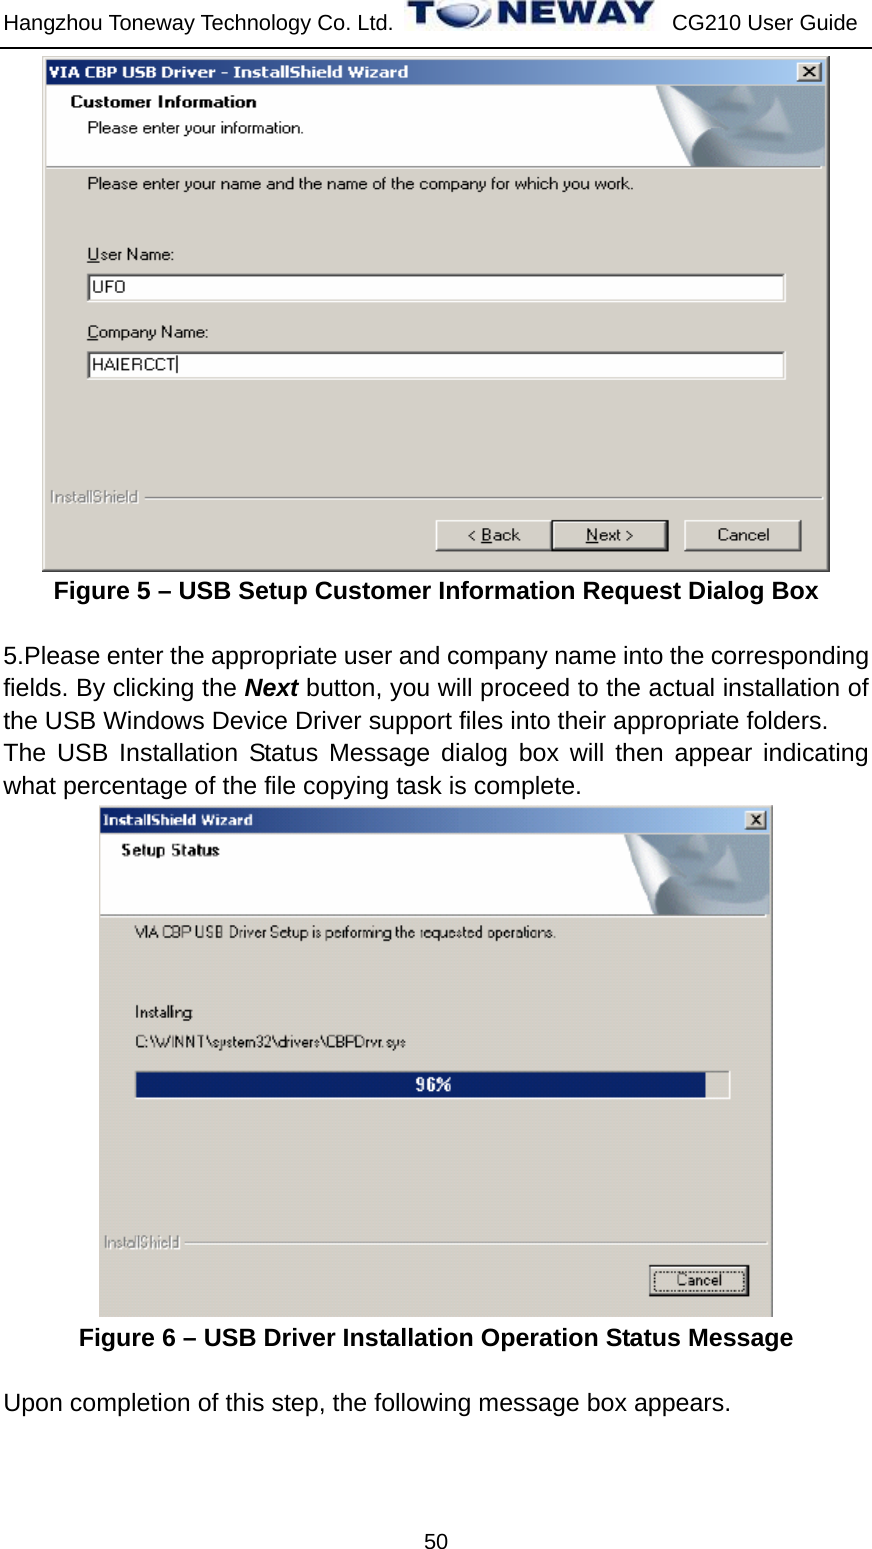 Hangzhou Toneway Technology Co. Ltd.    CG210 User Guide 50  Figure 5 – USB Setup Customer Information Request Dialog Box  5.Please enter the appropriate user and company name into the corresponding fields. By clicking the Next button, you will proceed to the actual installation of the USB Windows Device Driver support files into their appropriate folders. The USB Installation Status Message dialog box will then appear indicating what percentage of the file copying task is complete.  Figure 6 – USB Driver Installation Operation Status Message  Upon completion of this step, the following message box appears. 